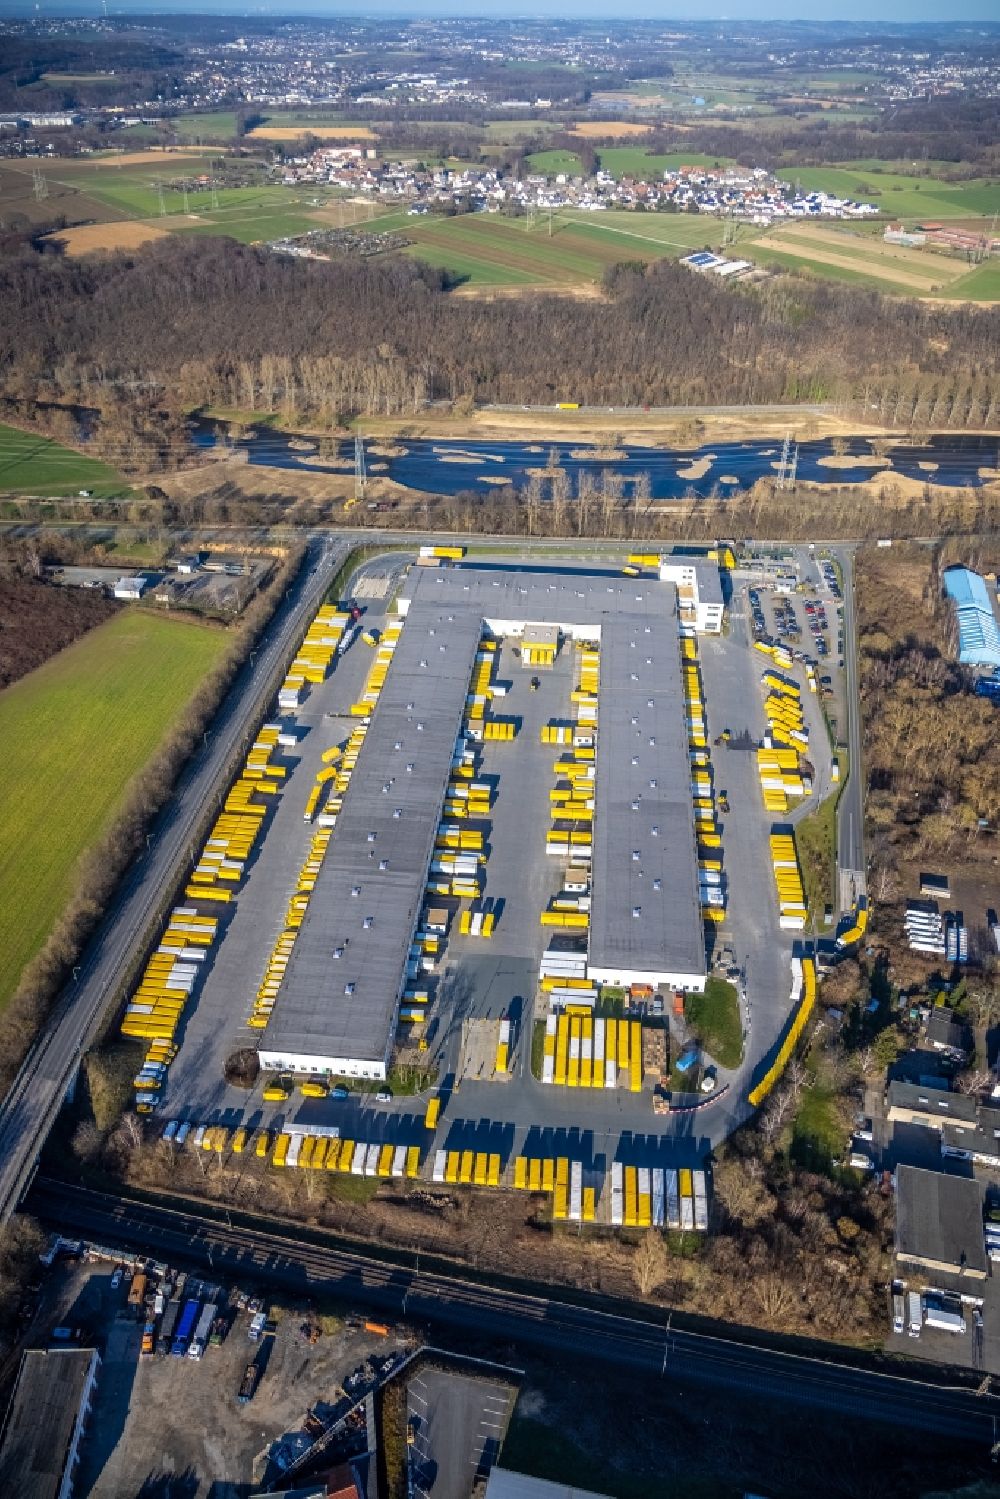 Hagen from the bird's eye view: Building complex and distribution center on the site DHL International GmbH - DHL Group in Hagen in the state North Rhine-Westphalia, Germany